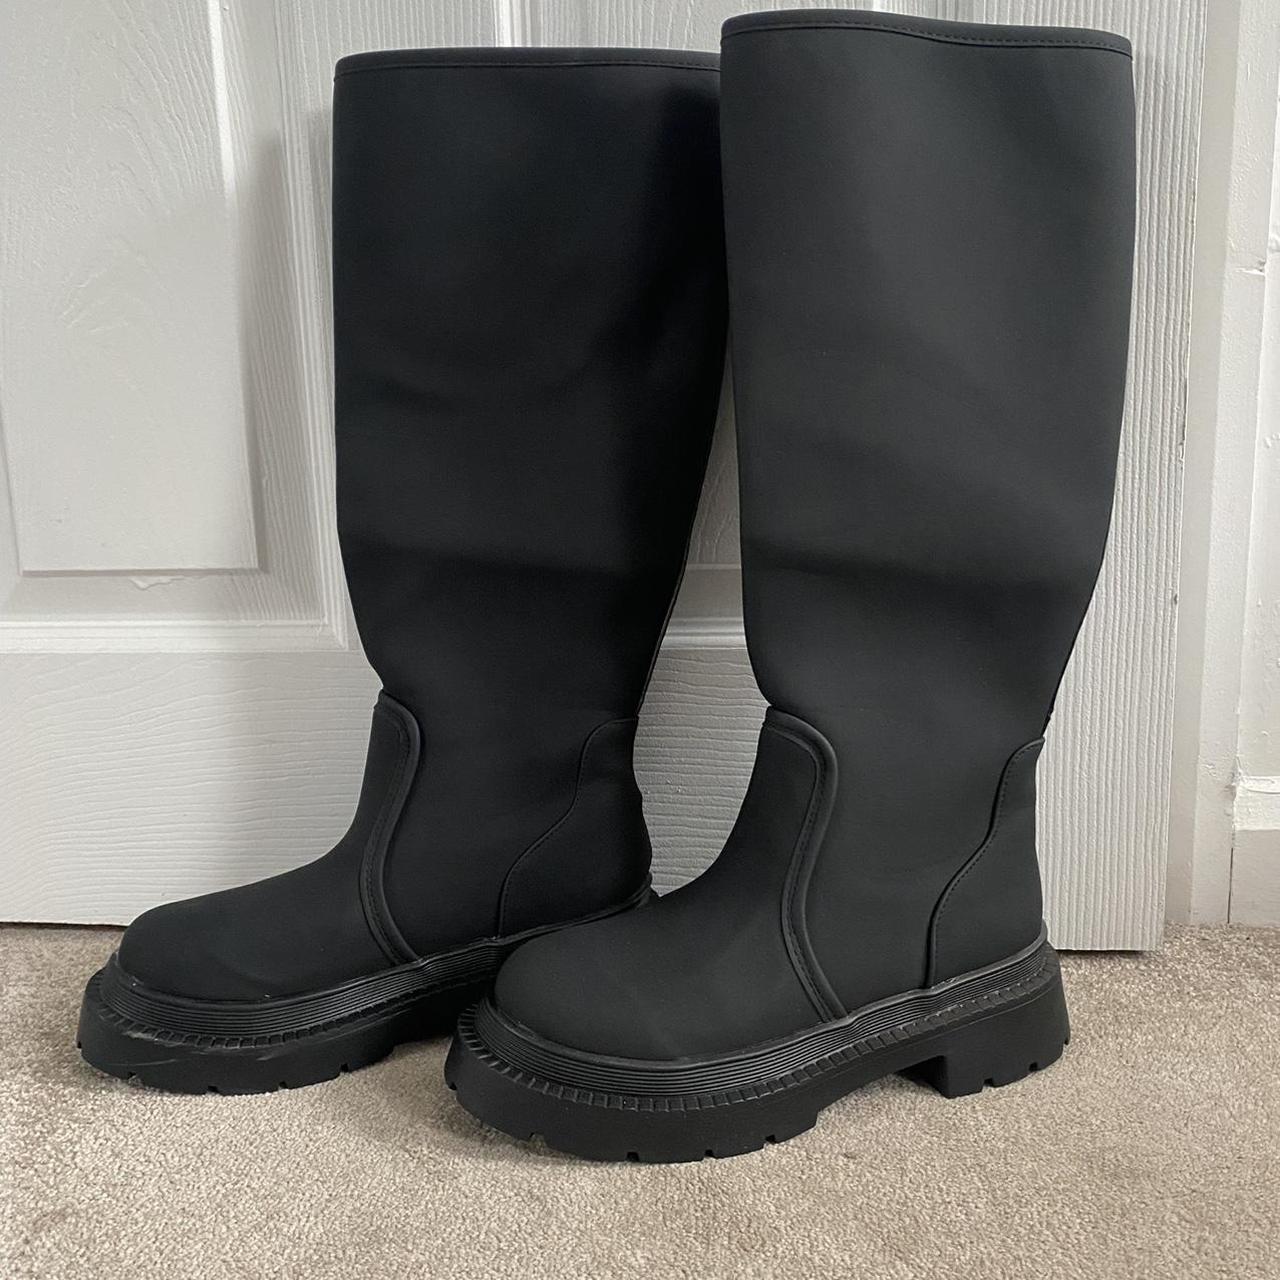 Zara wellies 2021: We've found a wide-fit dupe for the sell-out